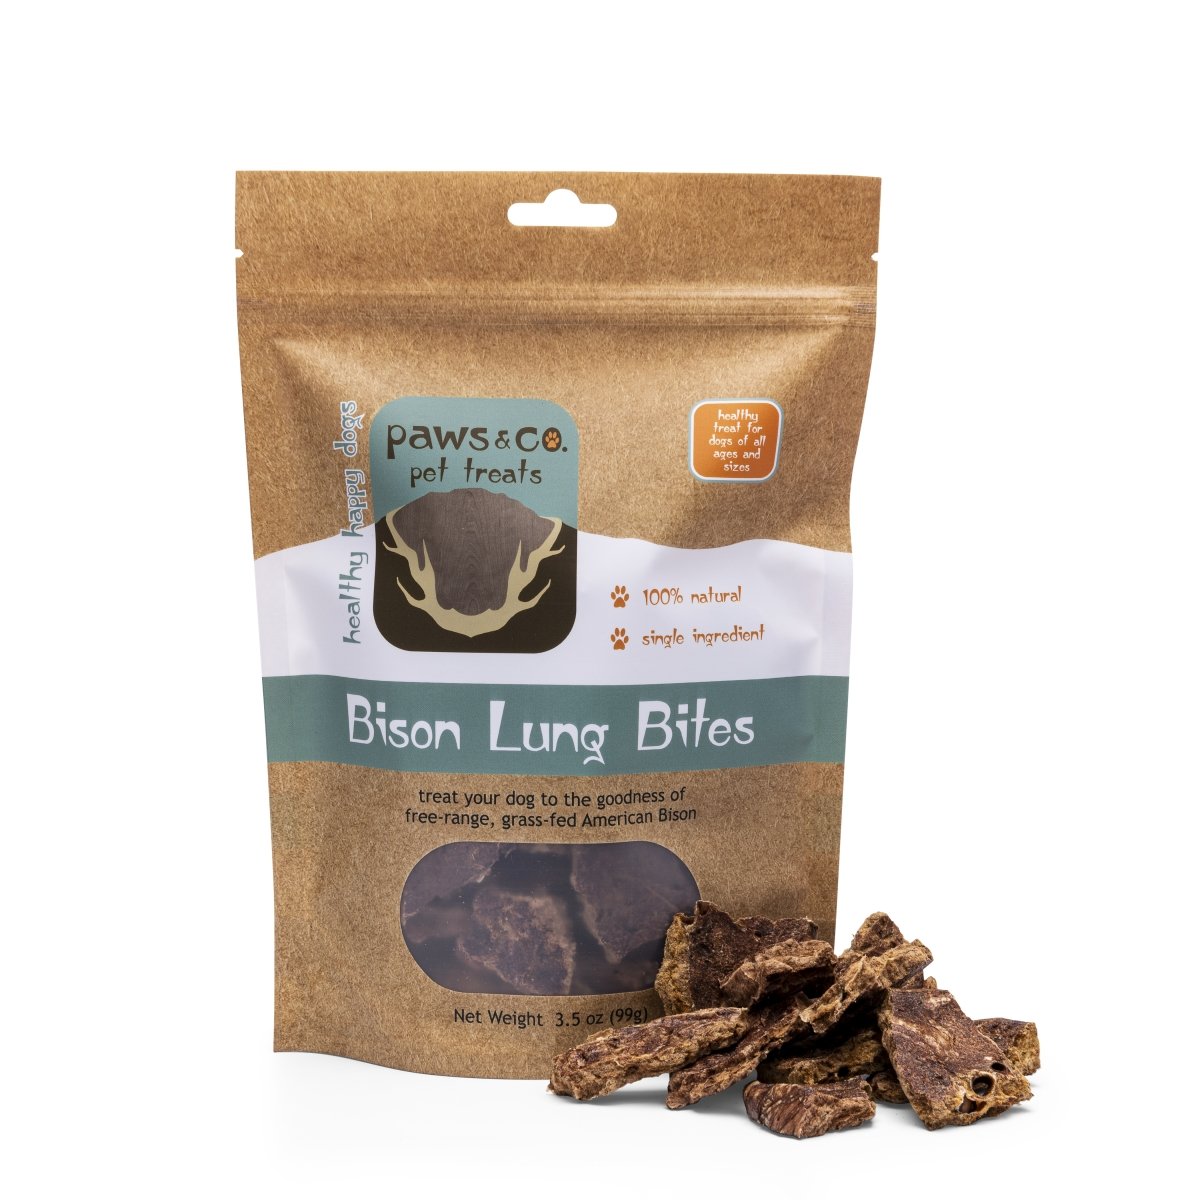 NEW! Bison Lung Bites - Paws & Co Dog Chews